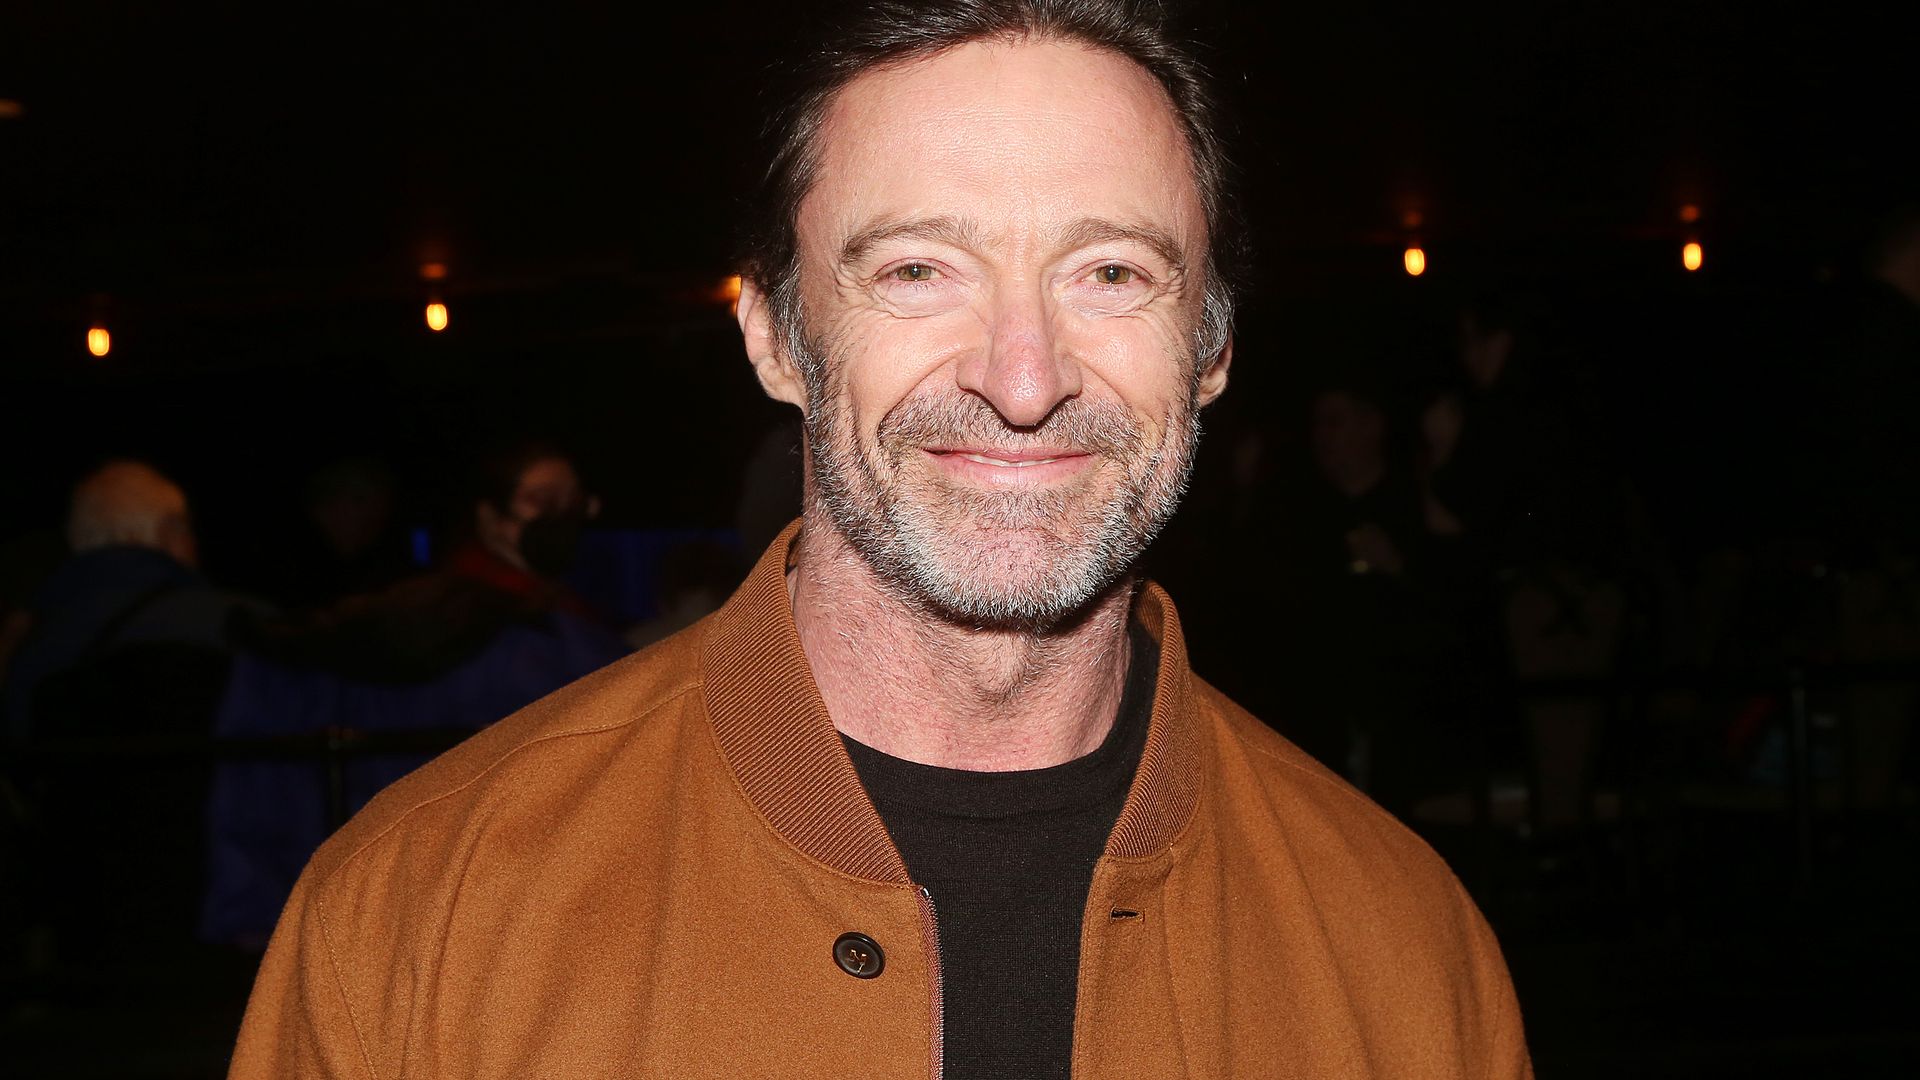 Hugh Jackman reveals morning routine post divorce after 'worrying' fans with recent photos